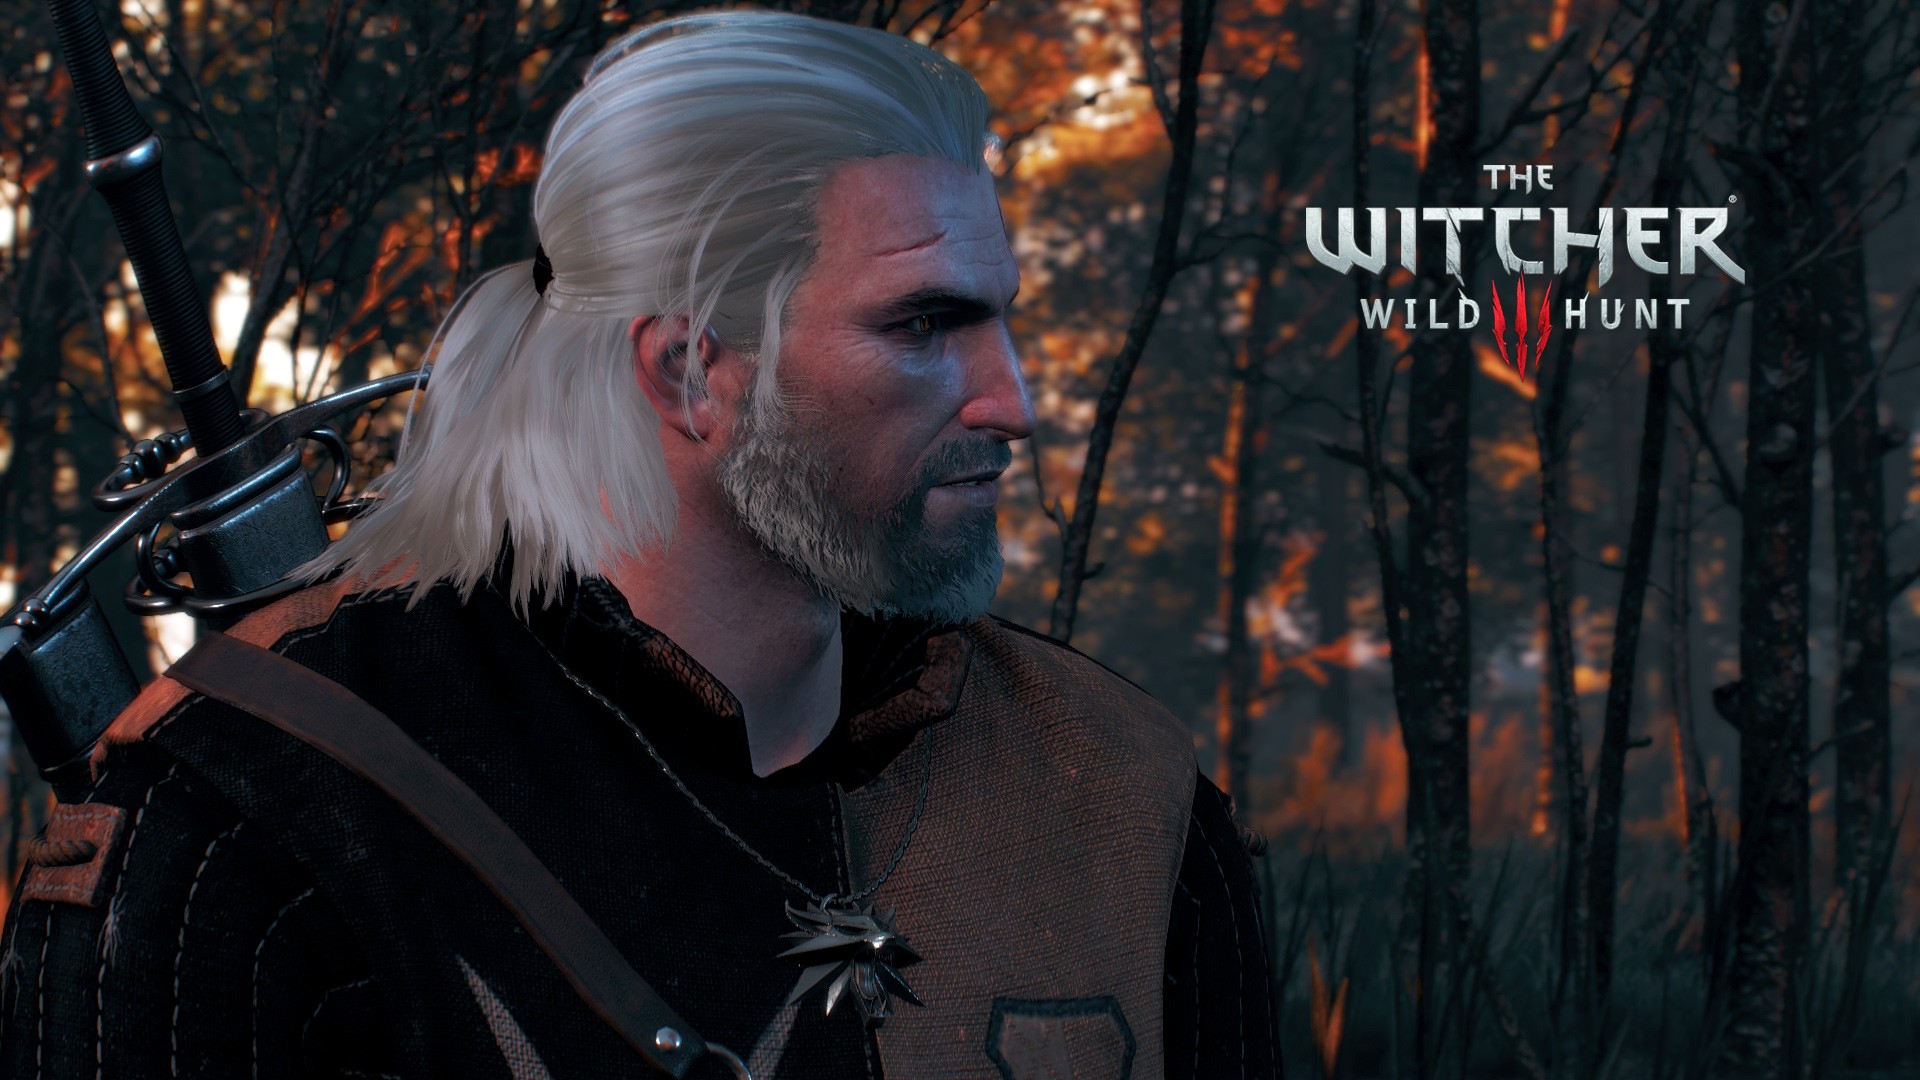 General 1920x1080 The Witcher 3: Wild Hunt video games Geralt of Rivia RPG PC gaming video game characters video game men fantasy men CD Projekt RED